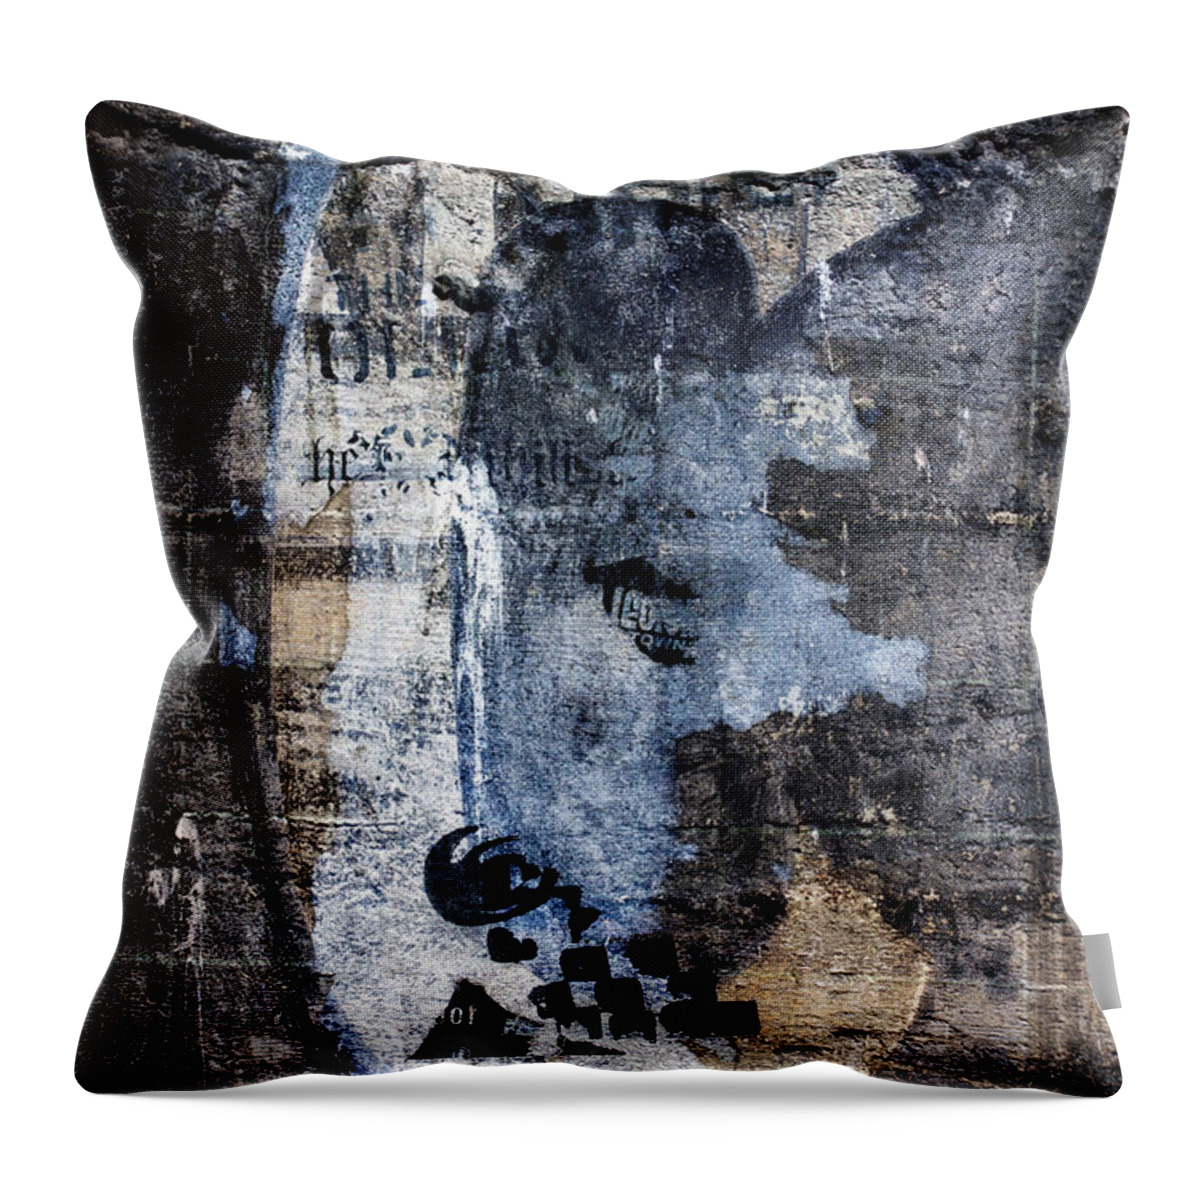 Letter Throw Pillow featuring the photograph Letter C Found On Walls by Carol Leigh